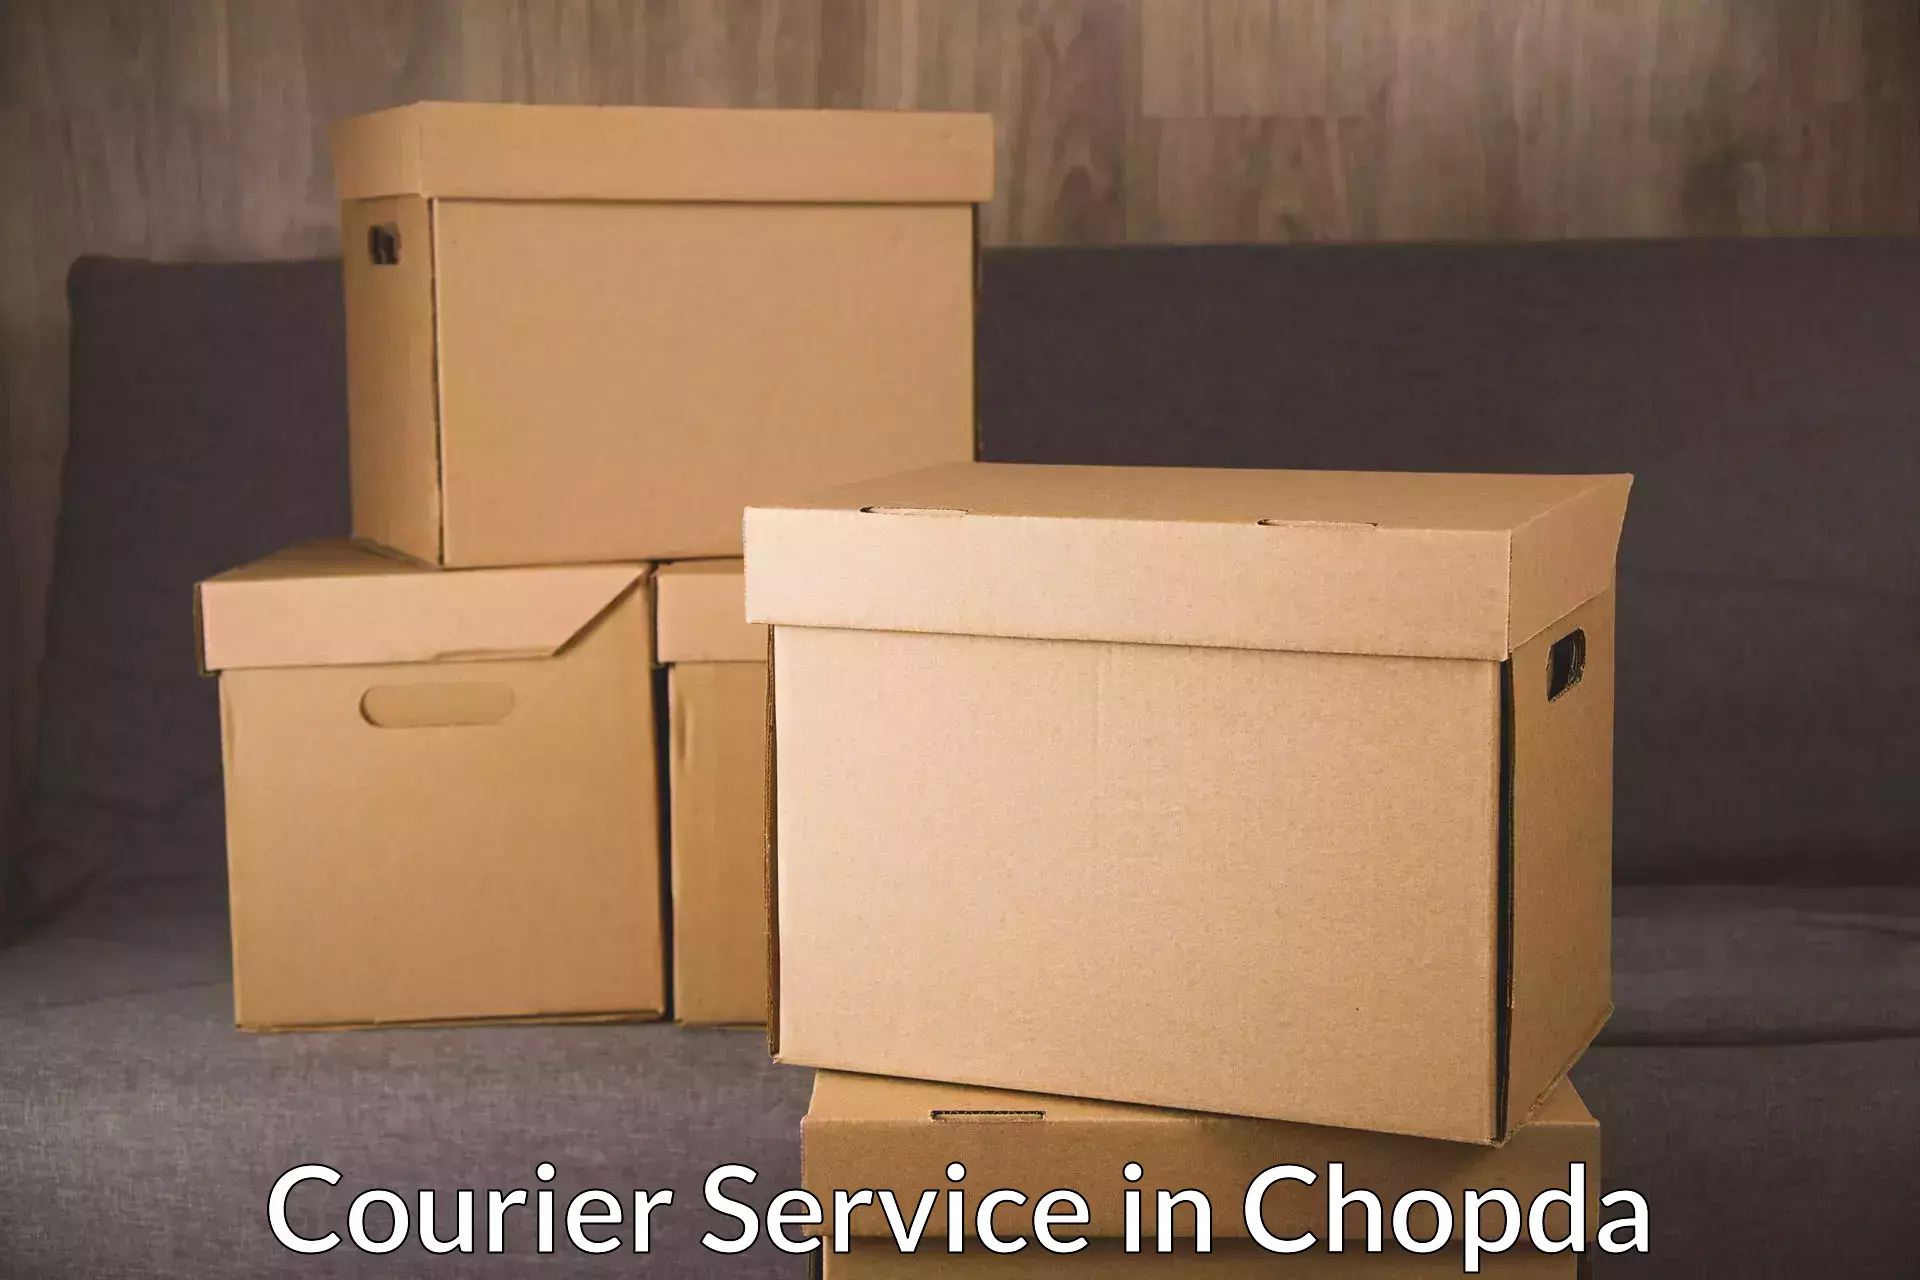 Nationwide parcel services in Chopda